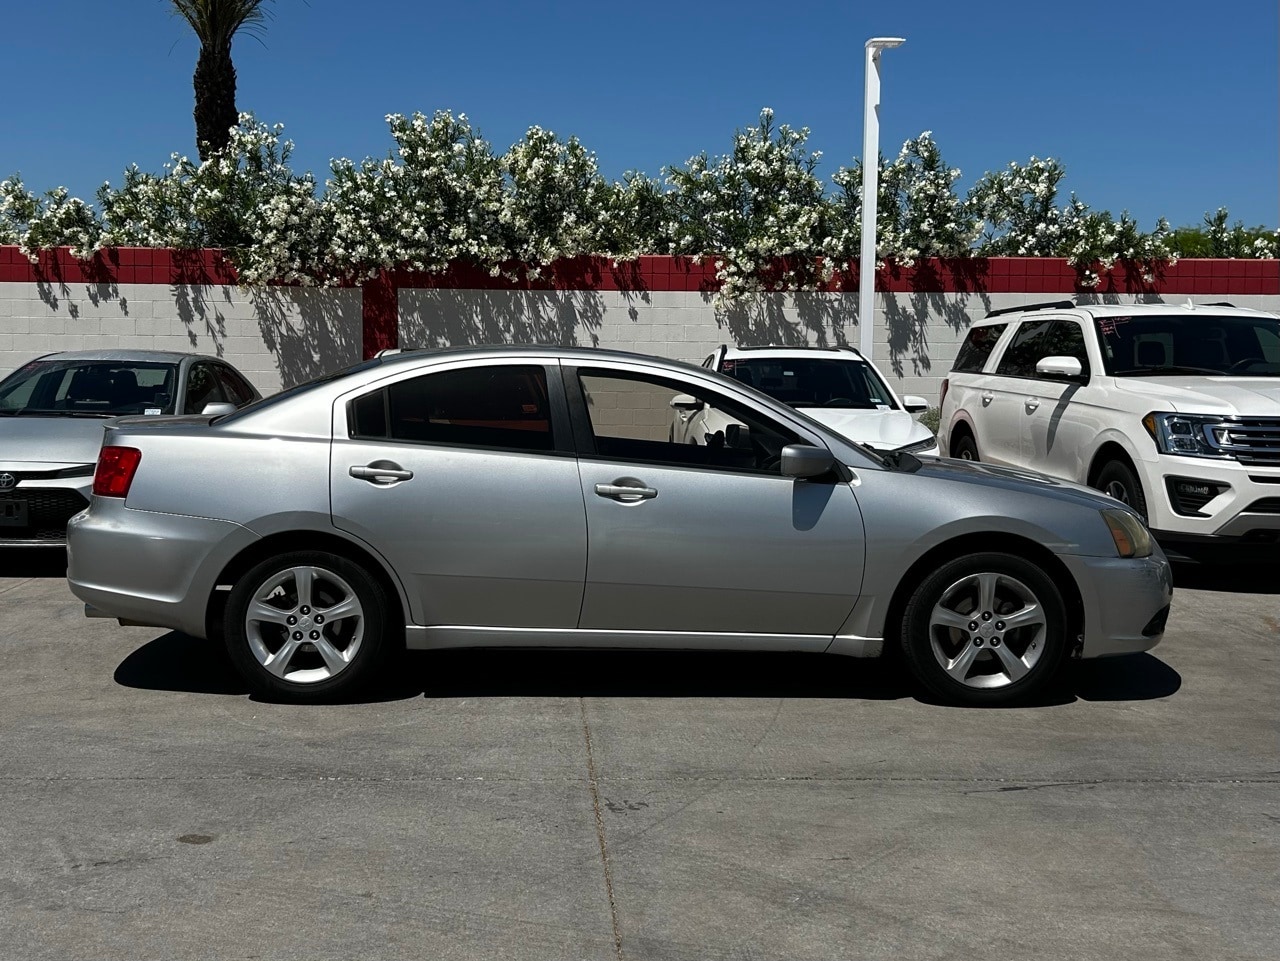 Used 2009 Mitsubishi Galant Sport with VIN 4A3AB36F79E001154 for sale in Phoenix, AZ